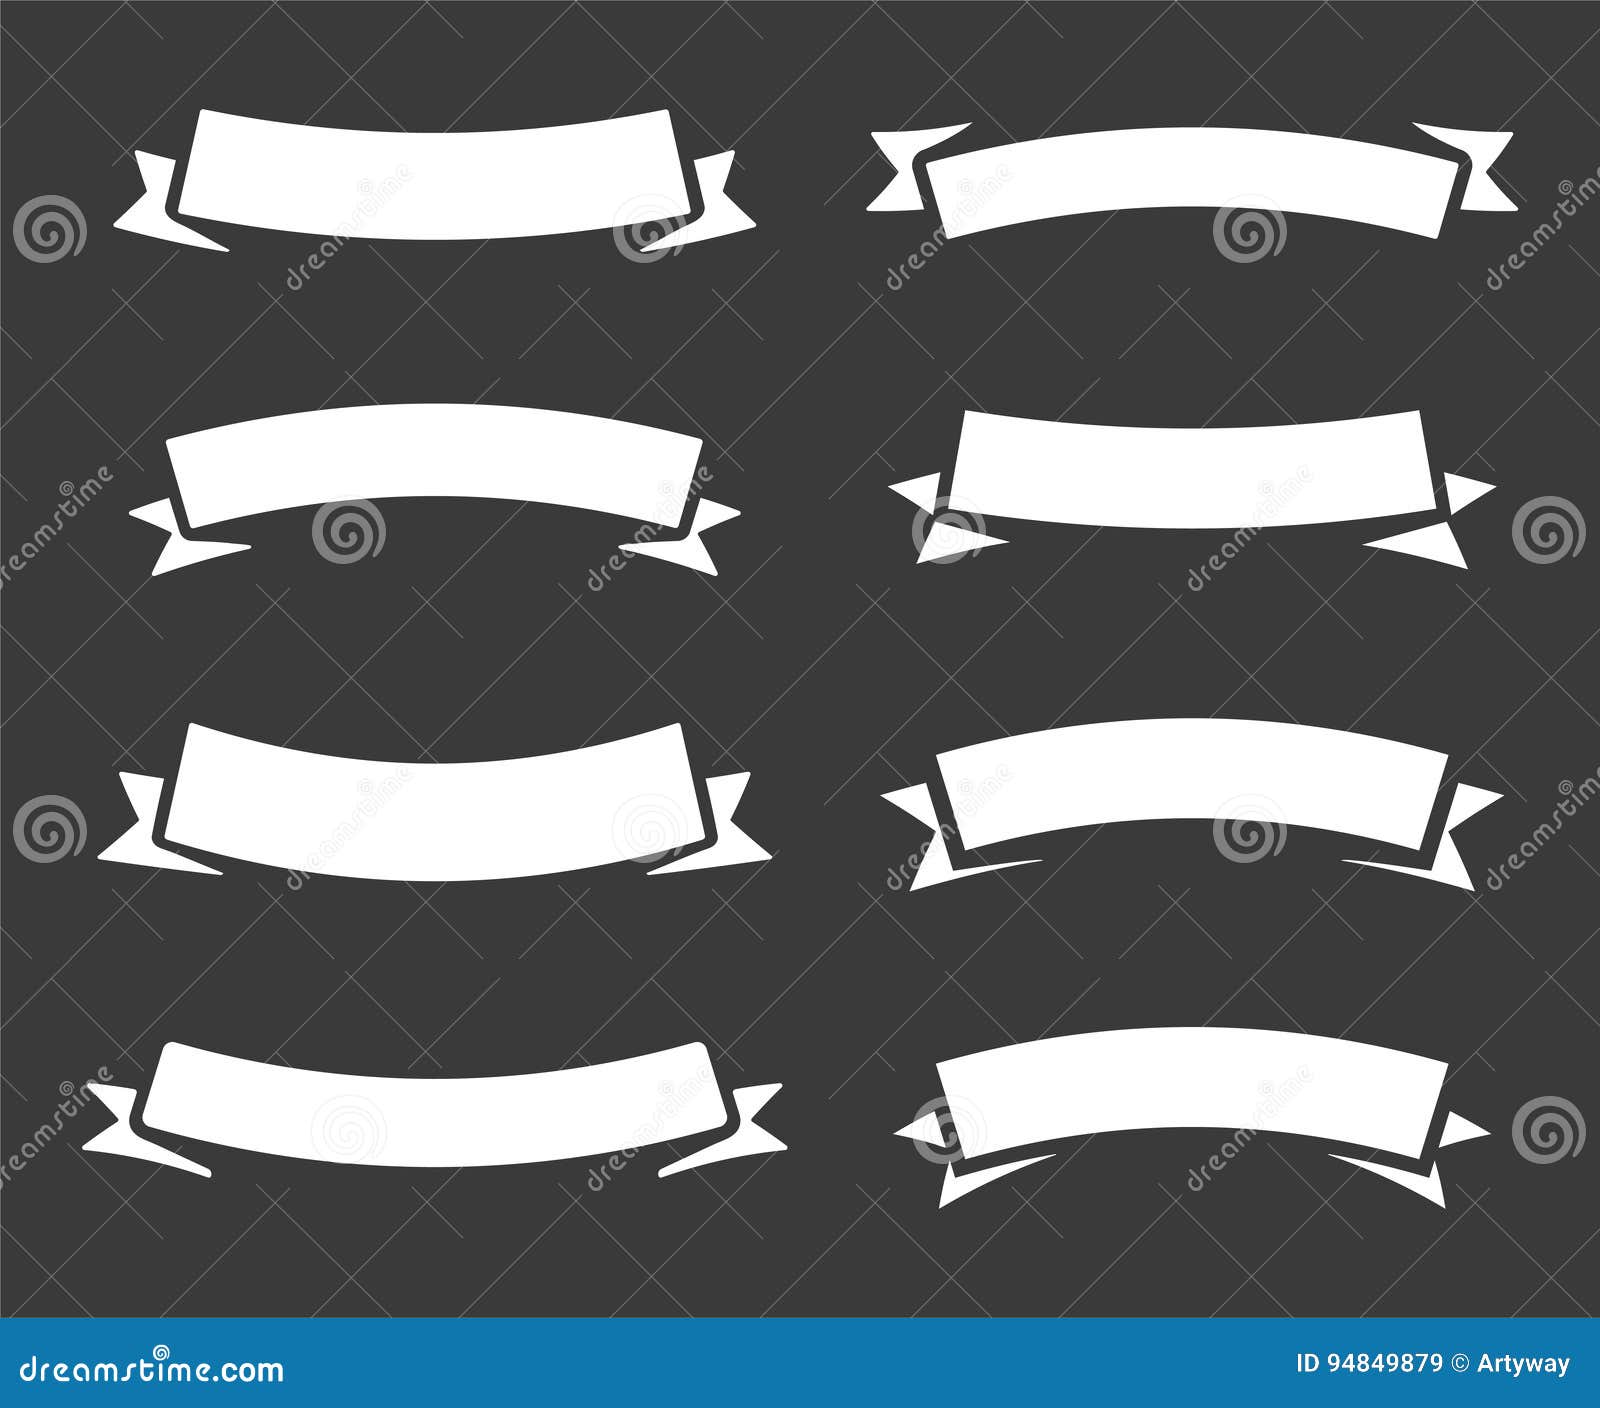 vintage  bent rounded arc banner ribbons, simple new retro modern   on black or dark gray background.